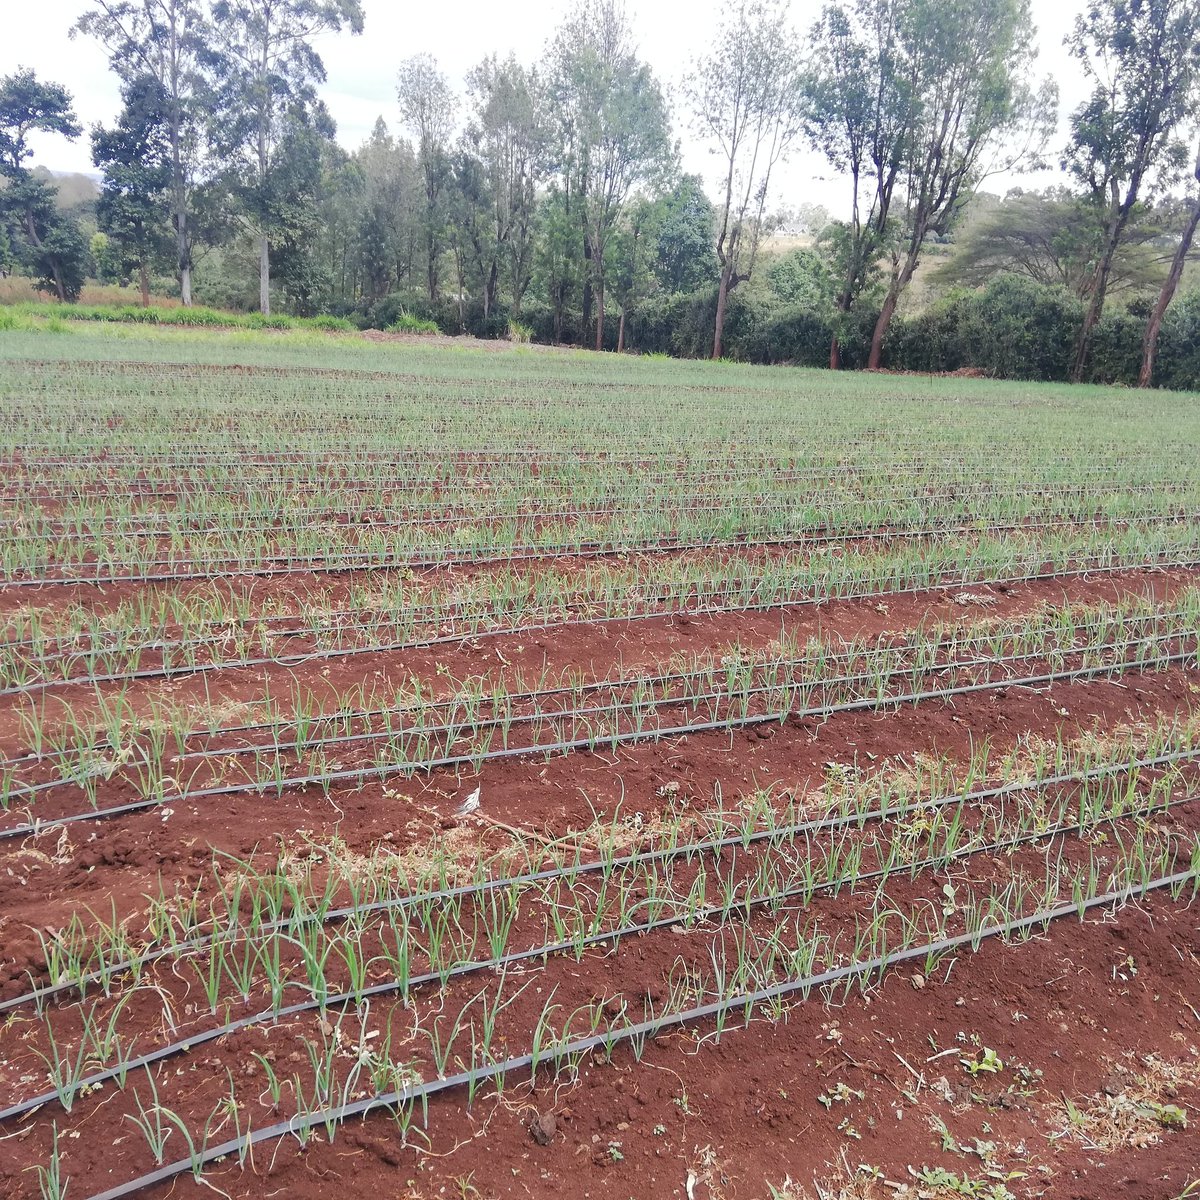 If you intend to use drip irrigation, another cost of approximately 150,000/=